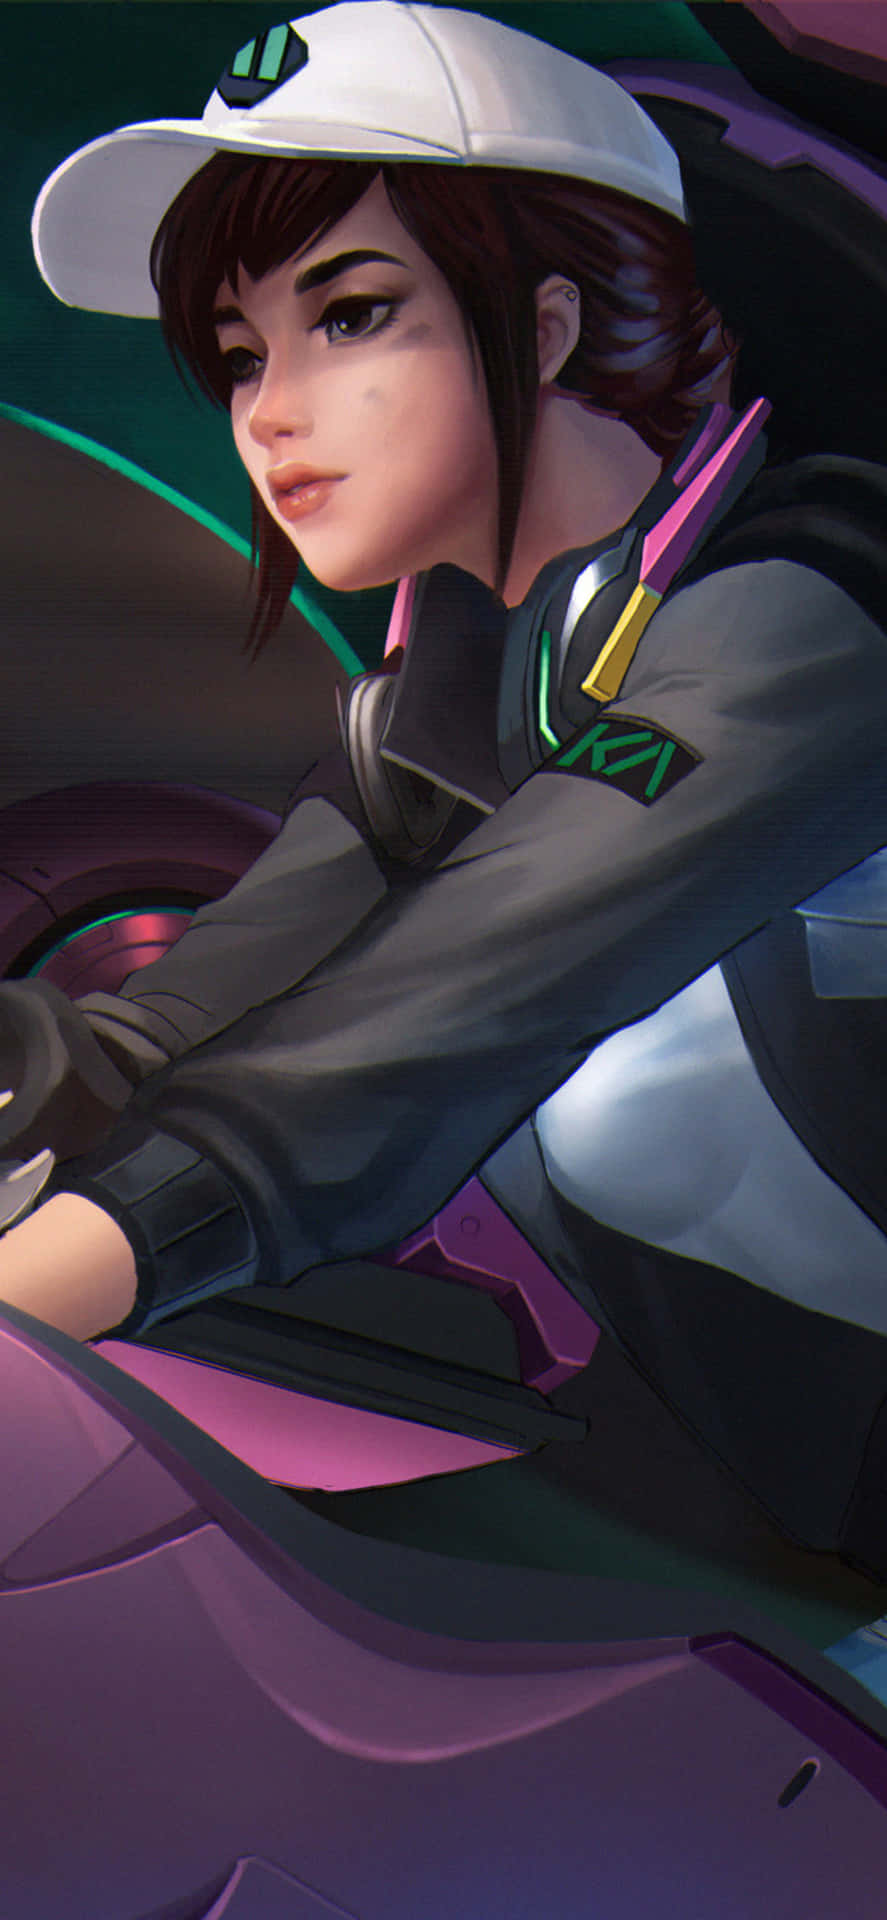 Iphone Xs Max Overwatch Background D.va Wearing A Cap Background